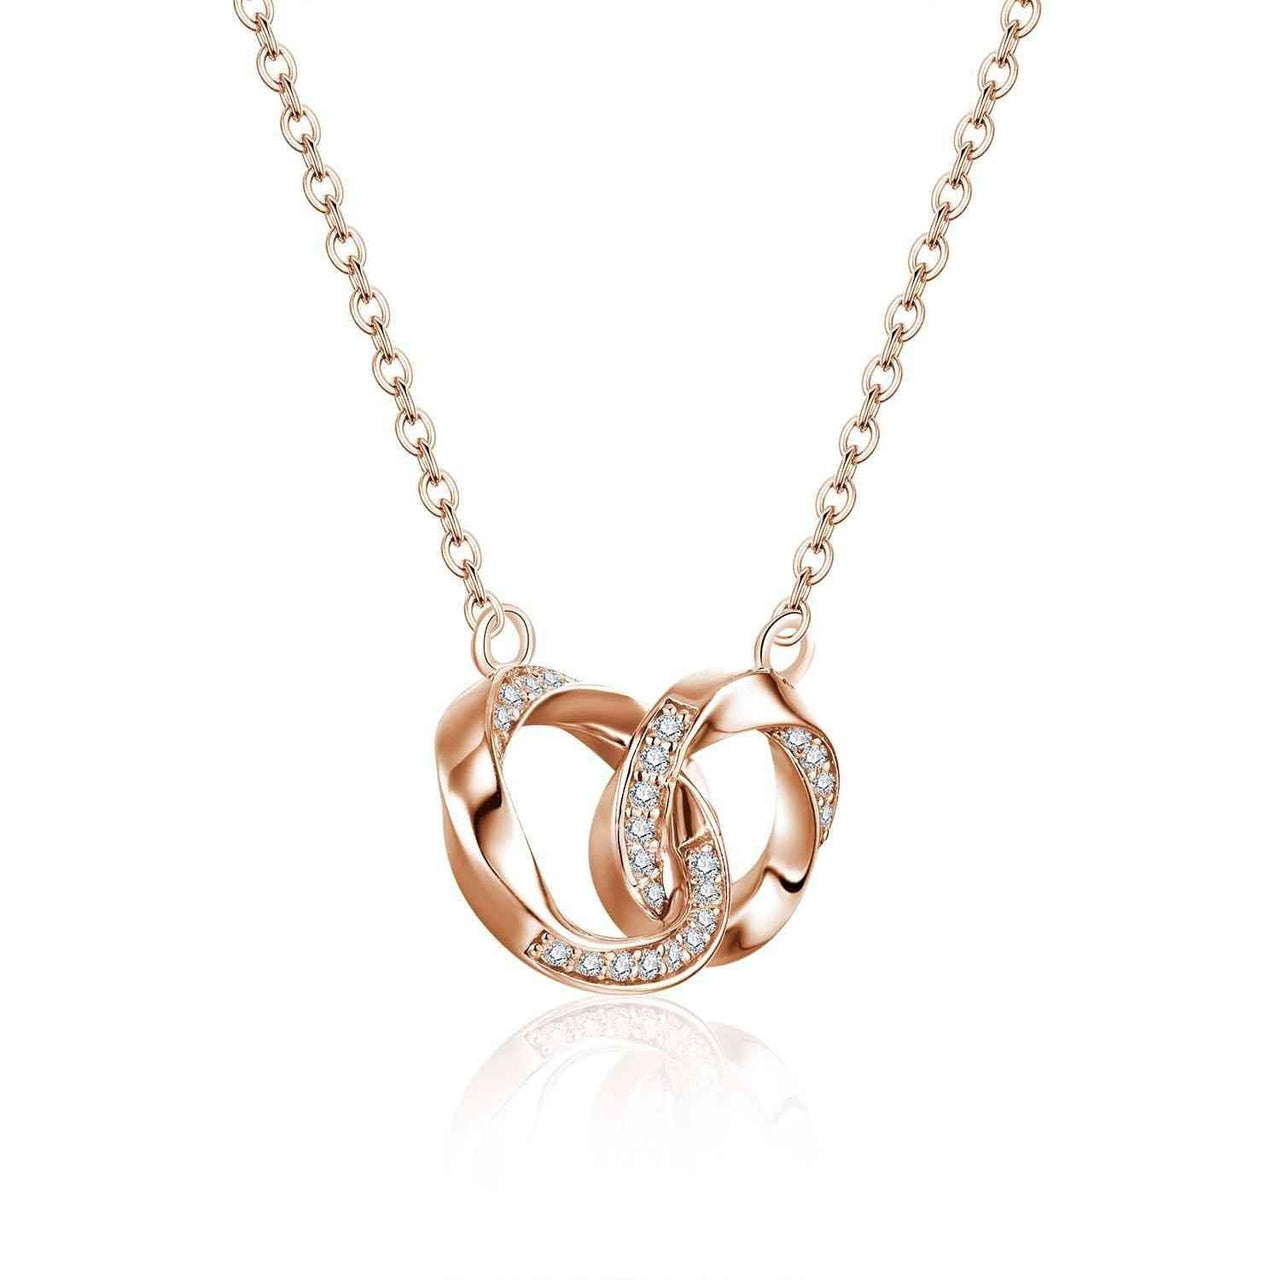 Moissanite 925 Sterling Silver/18K Rose Gold Interlocking/Eternity Hoop Necklace - God's Girl Gifts And Apparel